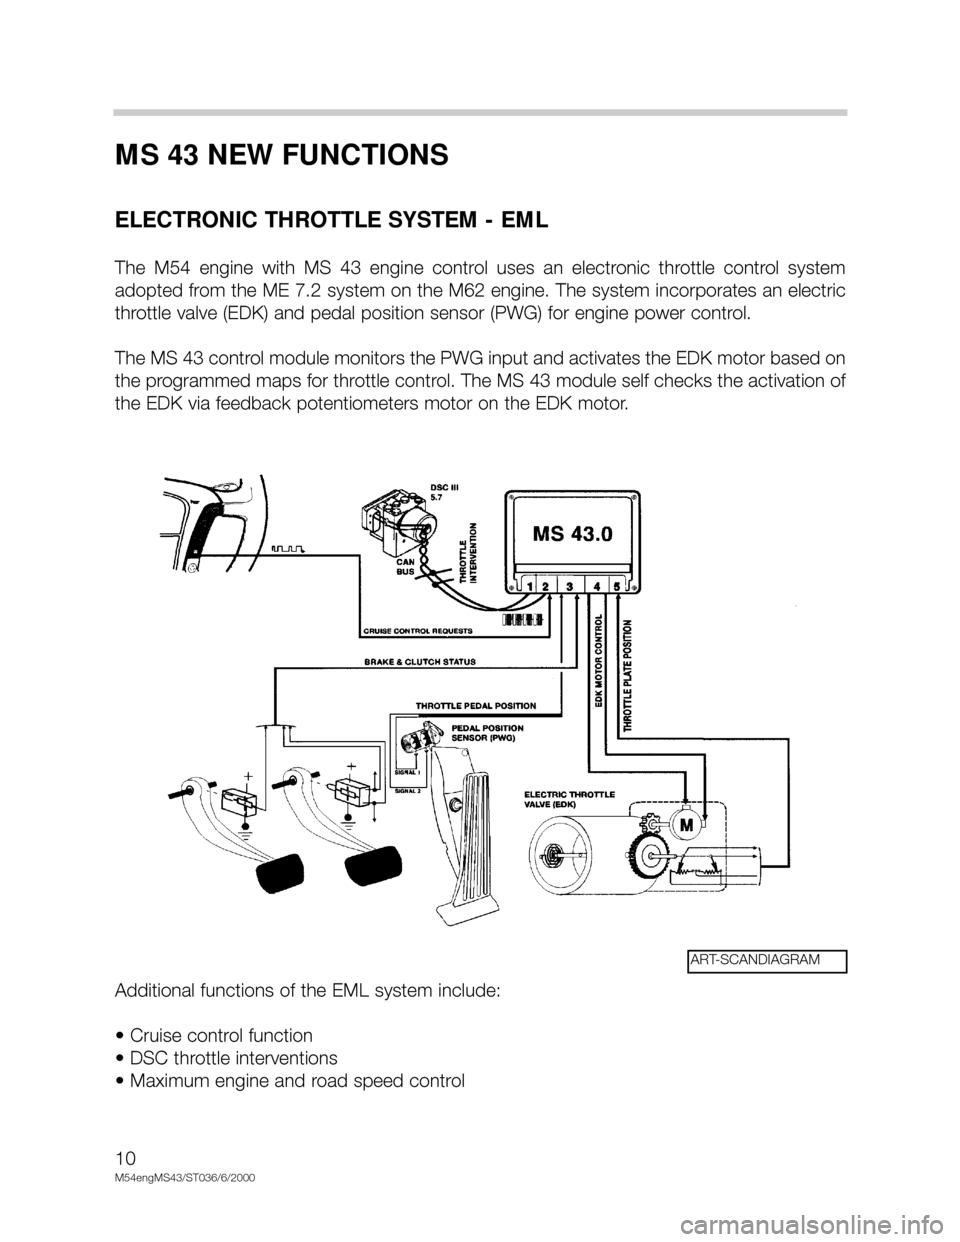 BMW X5 2005 E53 M54 Engine Workshop Manual 10
M54engMS43/ST036/6/2000
MS 43 NEW FUNCTIONS
ELECTRONIC THROTTLE SYSTEM - EML
The  M54  engine  with  MS  43  engine  control  uses  an  electronic  throttle  control  system
adopted from the ME 7.2